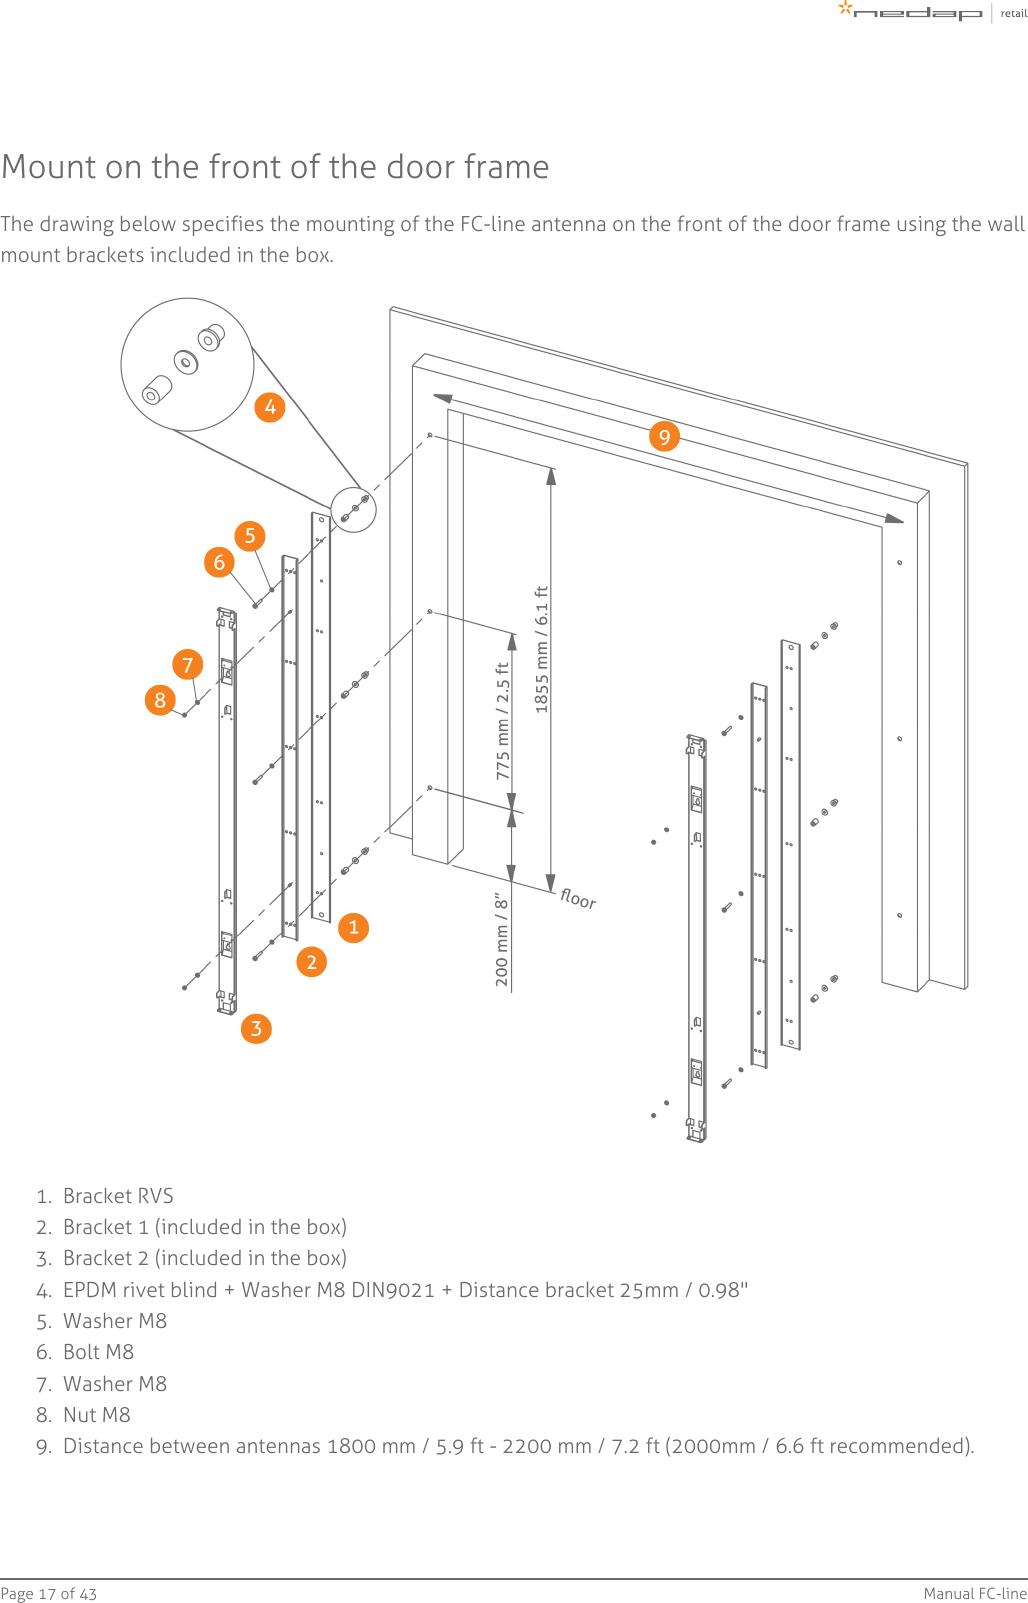 Page   of 17 43 Manual FC-line1.  2.  3.  4.  5.  6.  7.  8.  9.  Mount on the front of the door frameThe drawing below specifies the mounting of the FC-line antenna on the front of the door frame using the wallmount brackets included in the box.Bracket RVSBracket 1 (included in the box)Bracket 2 (included in the box)EPDM rivet blind + Washer M8 DIN9021 + Distance bracket 25mm / 0.98&quot;Washer M8Bolt M8Washer M8Nut M8Distance between antennas 1800 mm / 5.9 ft - 2200 mm / 7.2 ft (2000mm / 6.6 ft recommended).